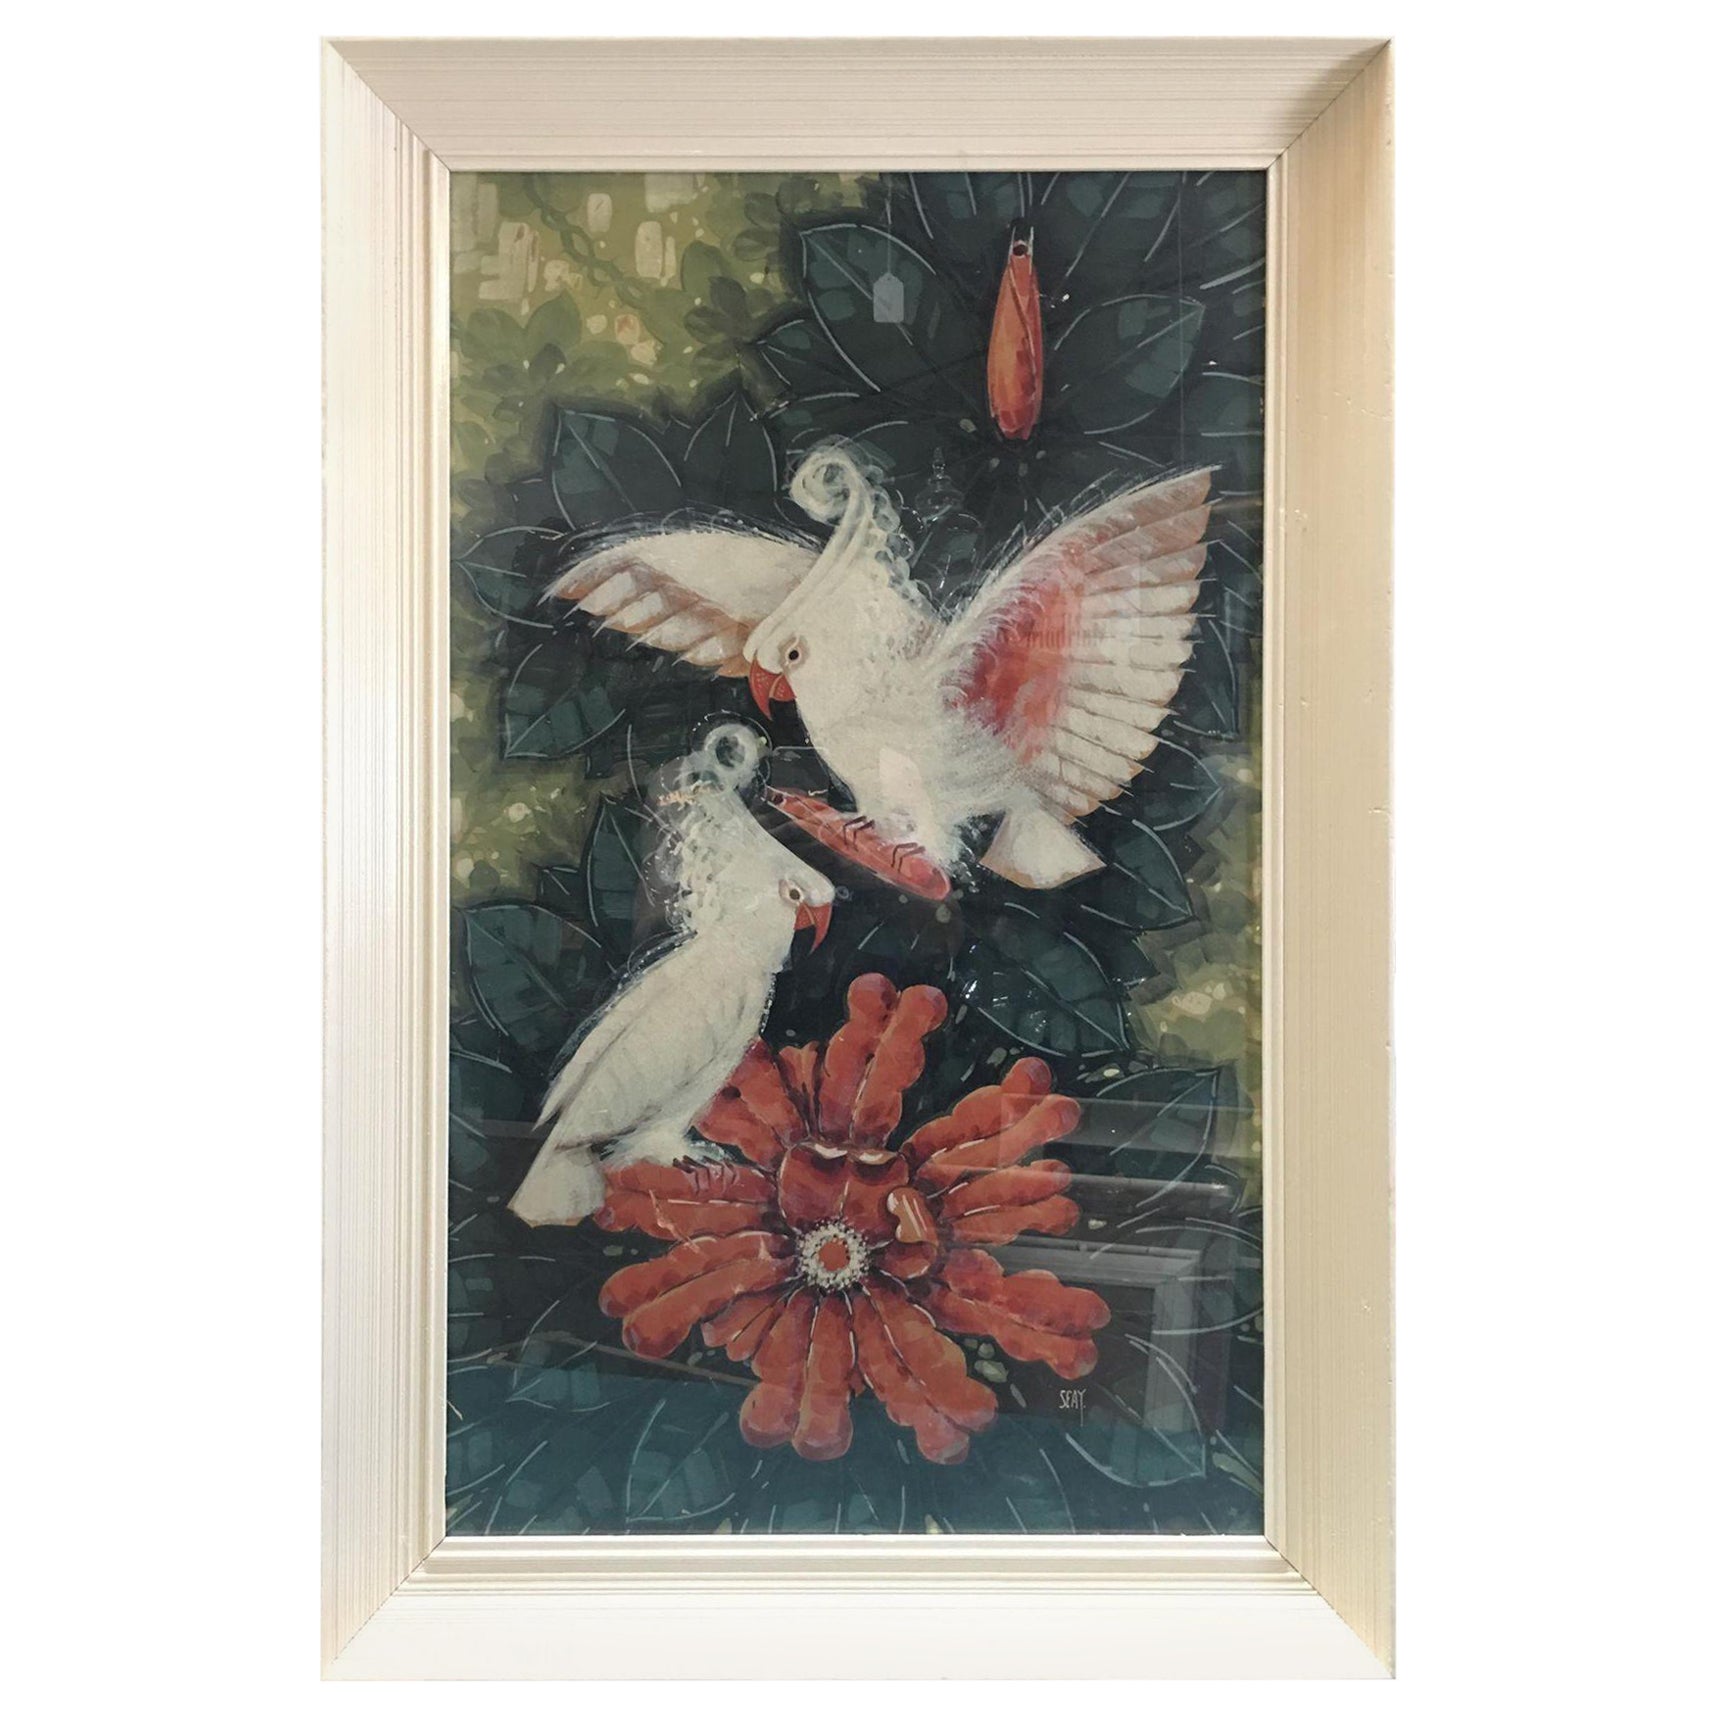 Billy Seay "Lovers" Cockatoo Painted Art Print for Turner, Framed